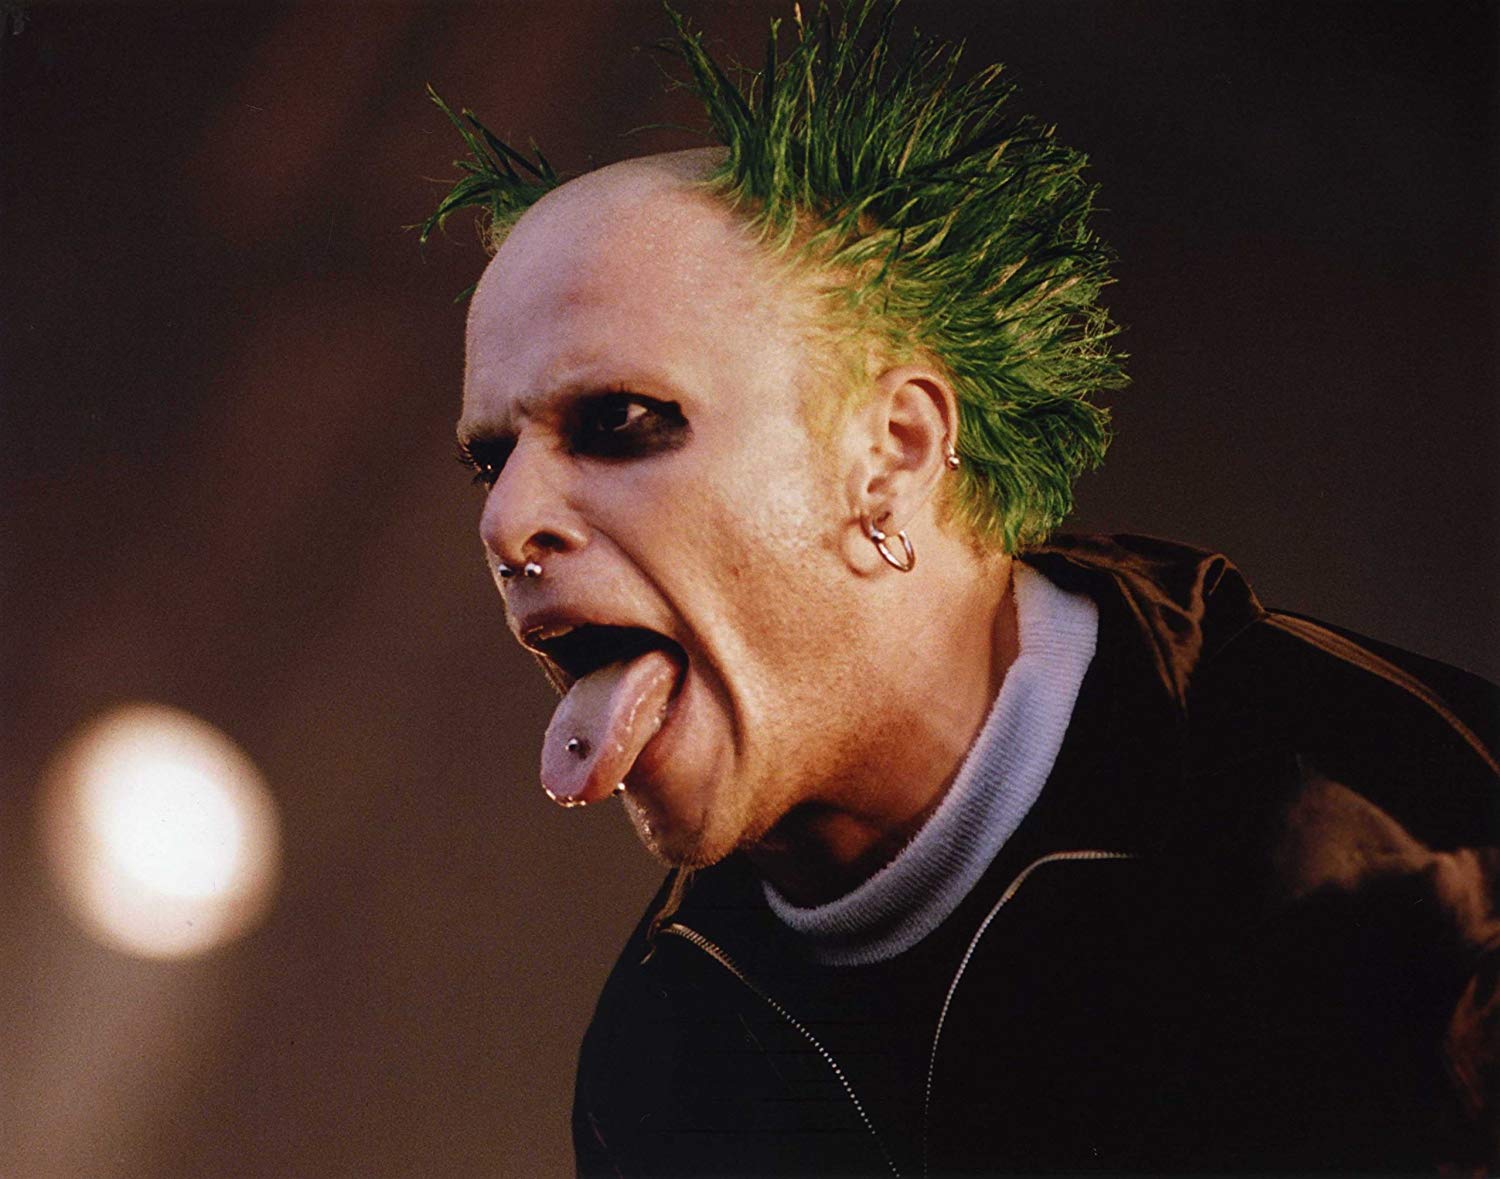 Prodigy Vocalist Keith Flint, Reportedly Found Dead In His Home - He Was 49